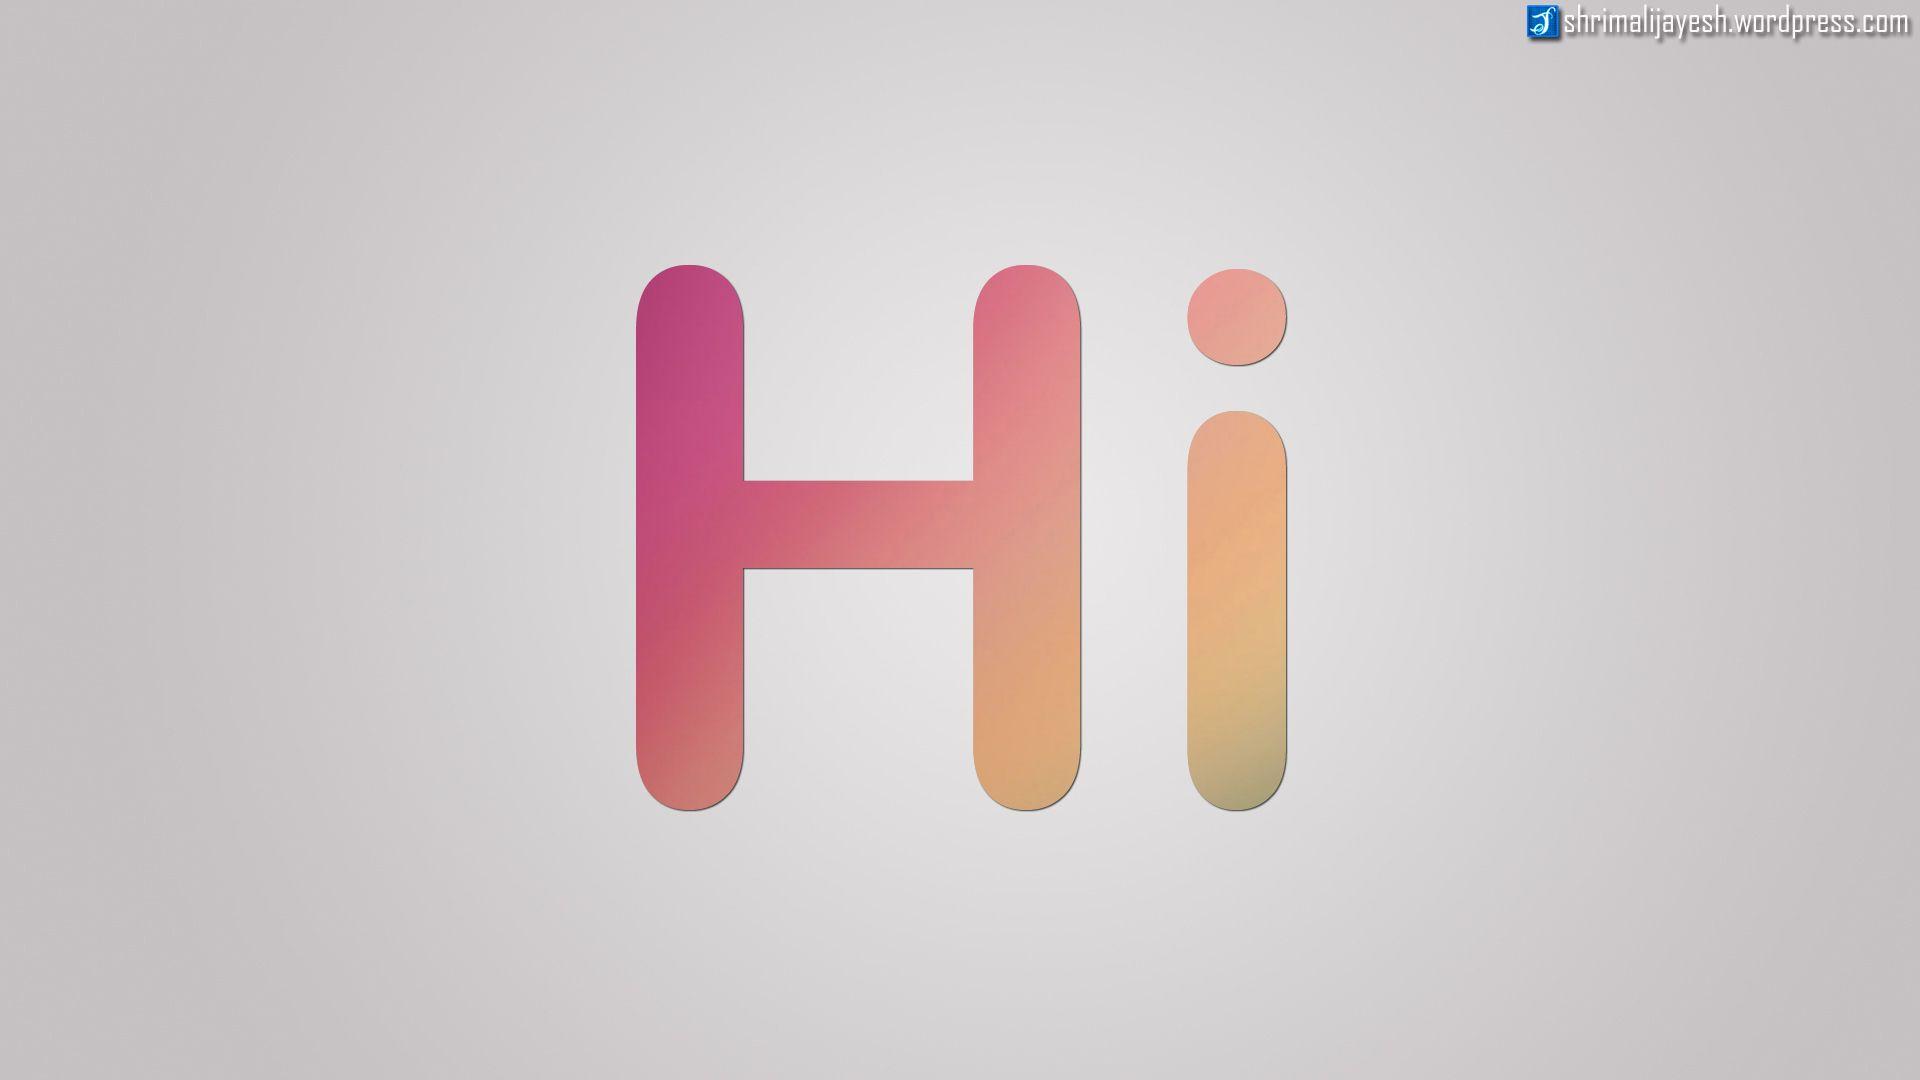 Hi Hello images HD wallpapers free download for whatsapp facebook